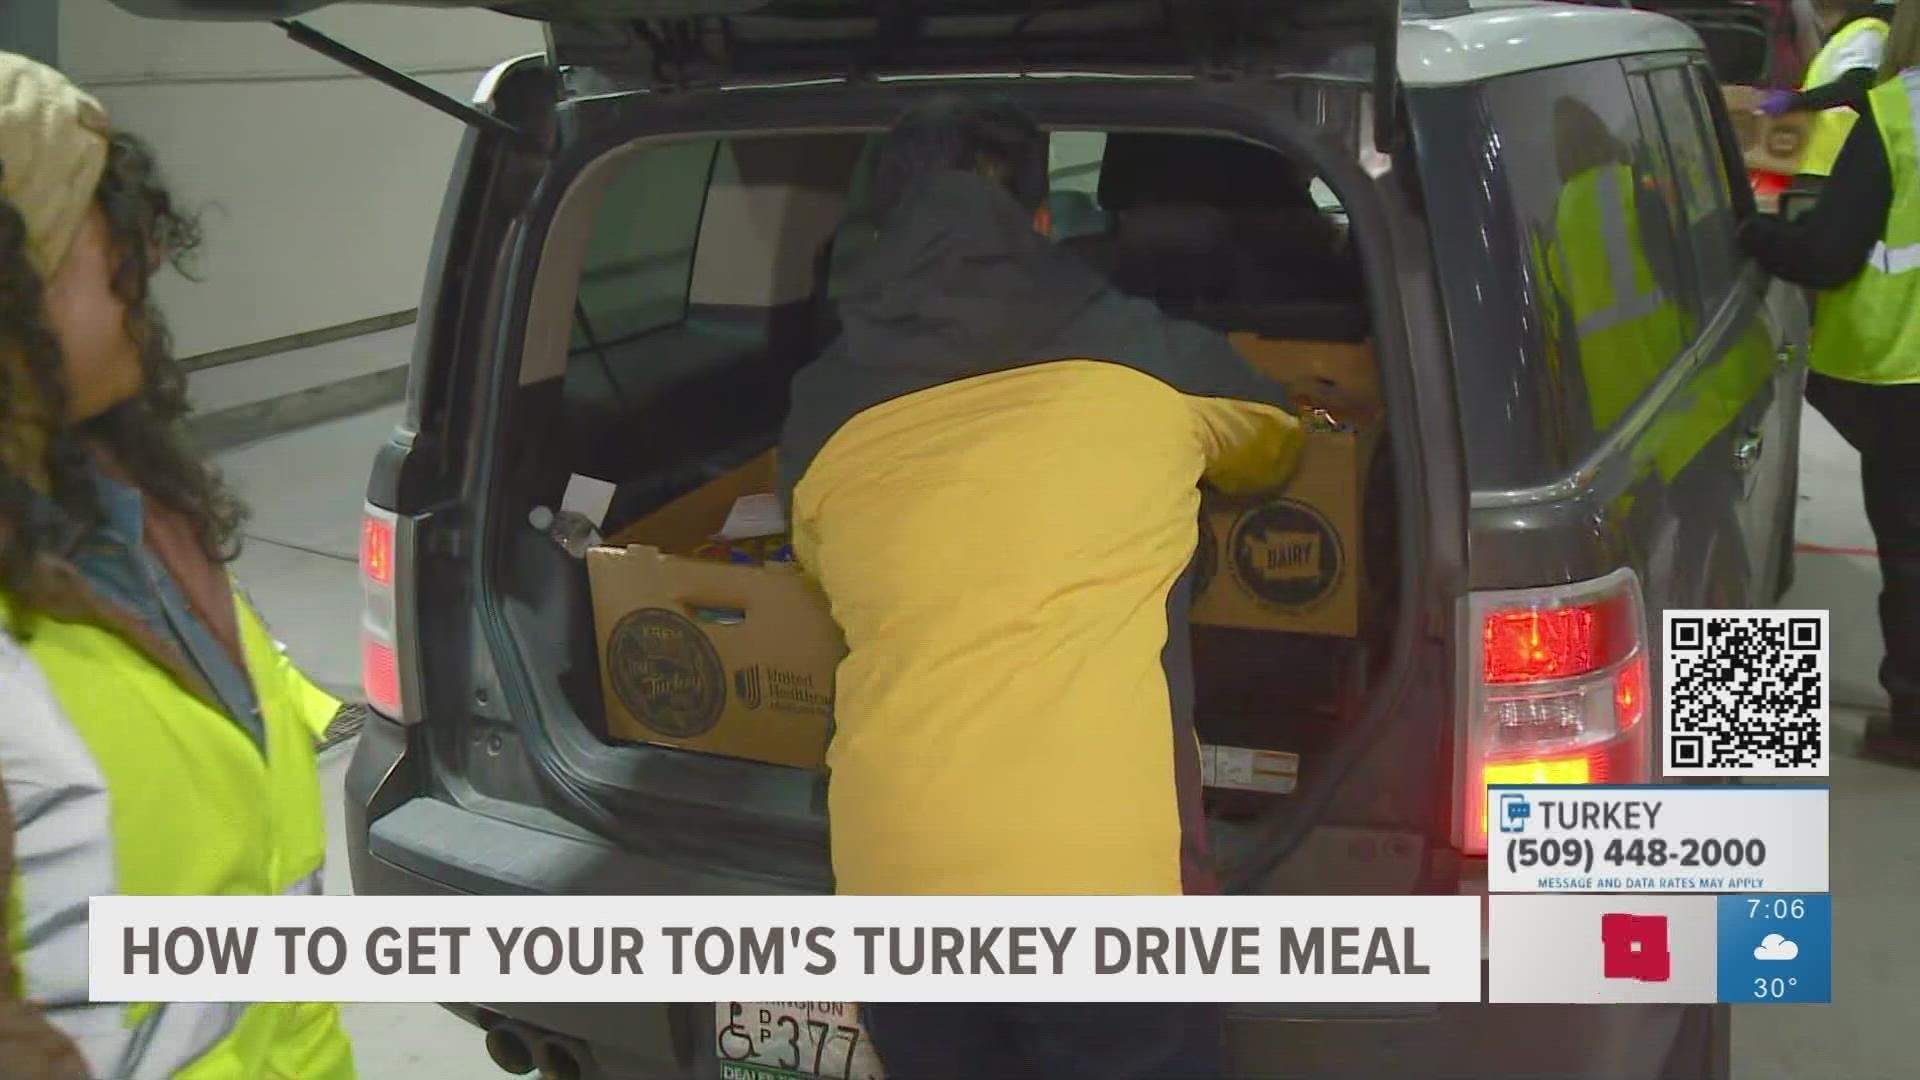 KREM Cares Tom's Turkey Drive meals are being handed out at the Spokane County Fairgrounds on Tuesday.